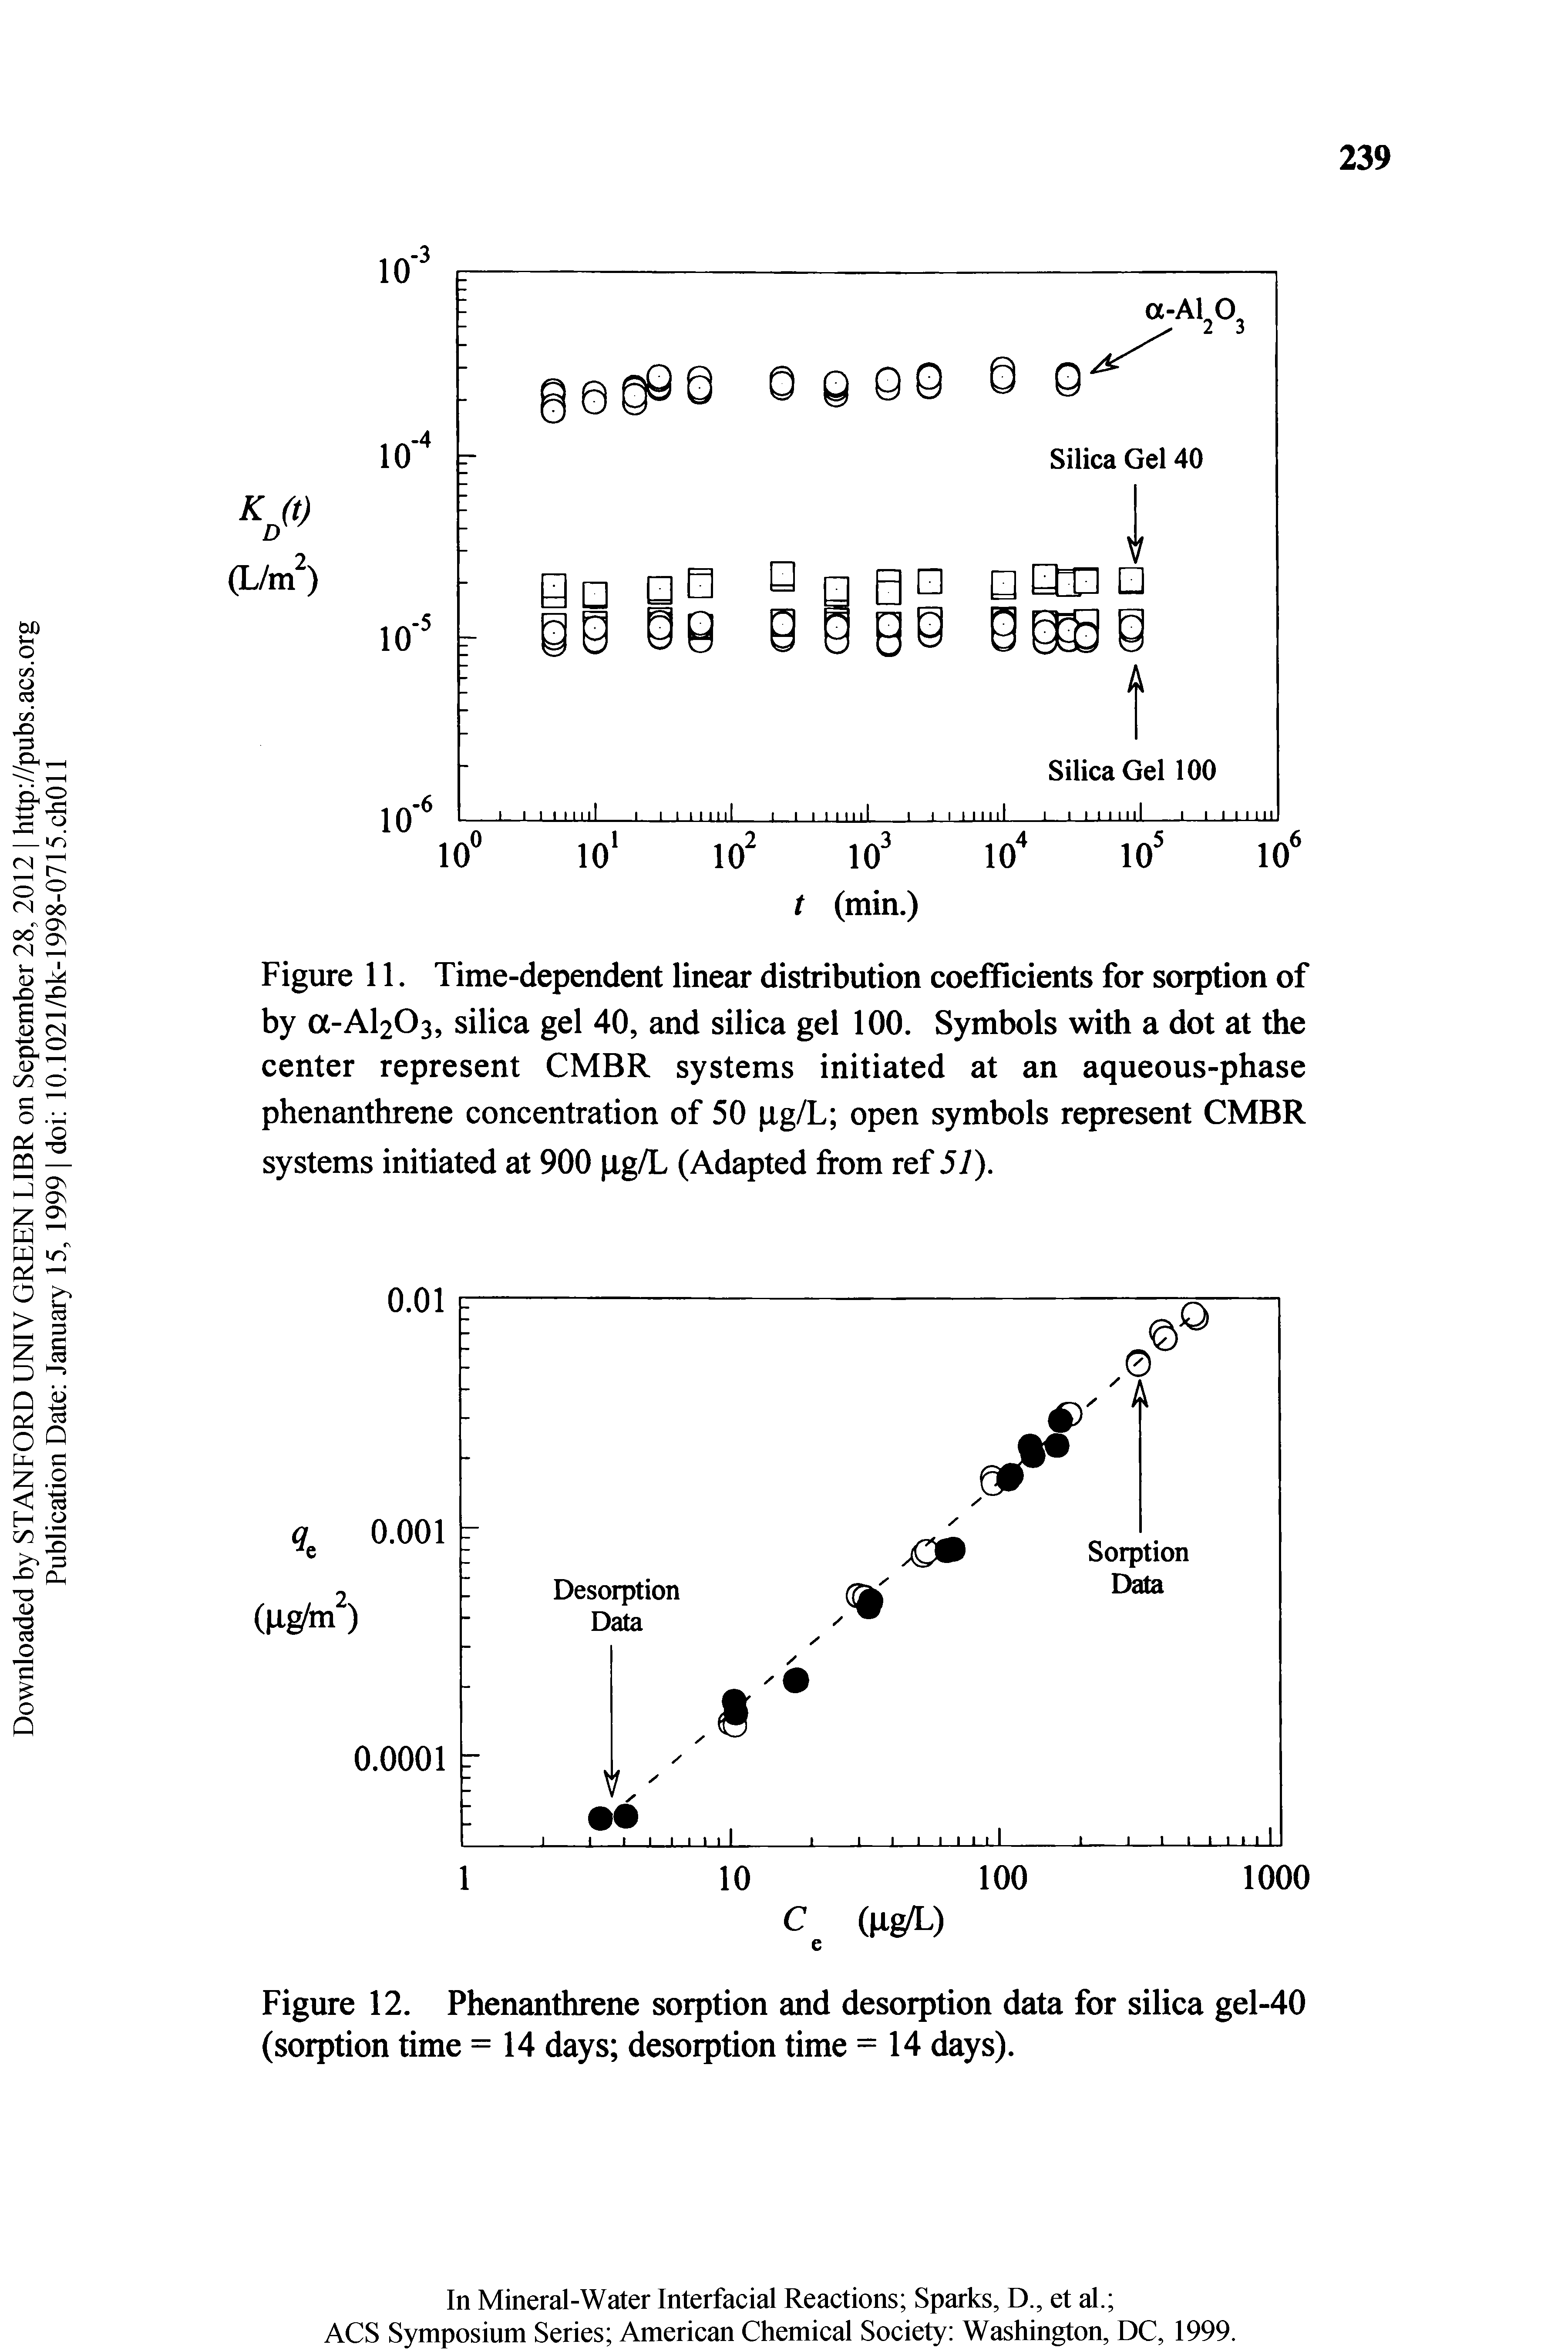 Figure 11. Time-dependent linear distribution coefficients for sorption of by a-Al203, silica gel 40, and silica gel 100. Symbols with a dot at the center represent CMBR systems initiated at an aqueous-phase phenanthrene concentration of 50 ig/L open symbols represent CMBR systems initiated at 900 iig/L (Adapted from ref 51).